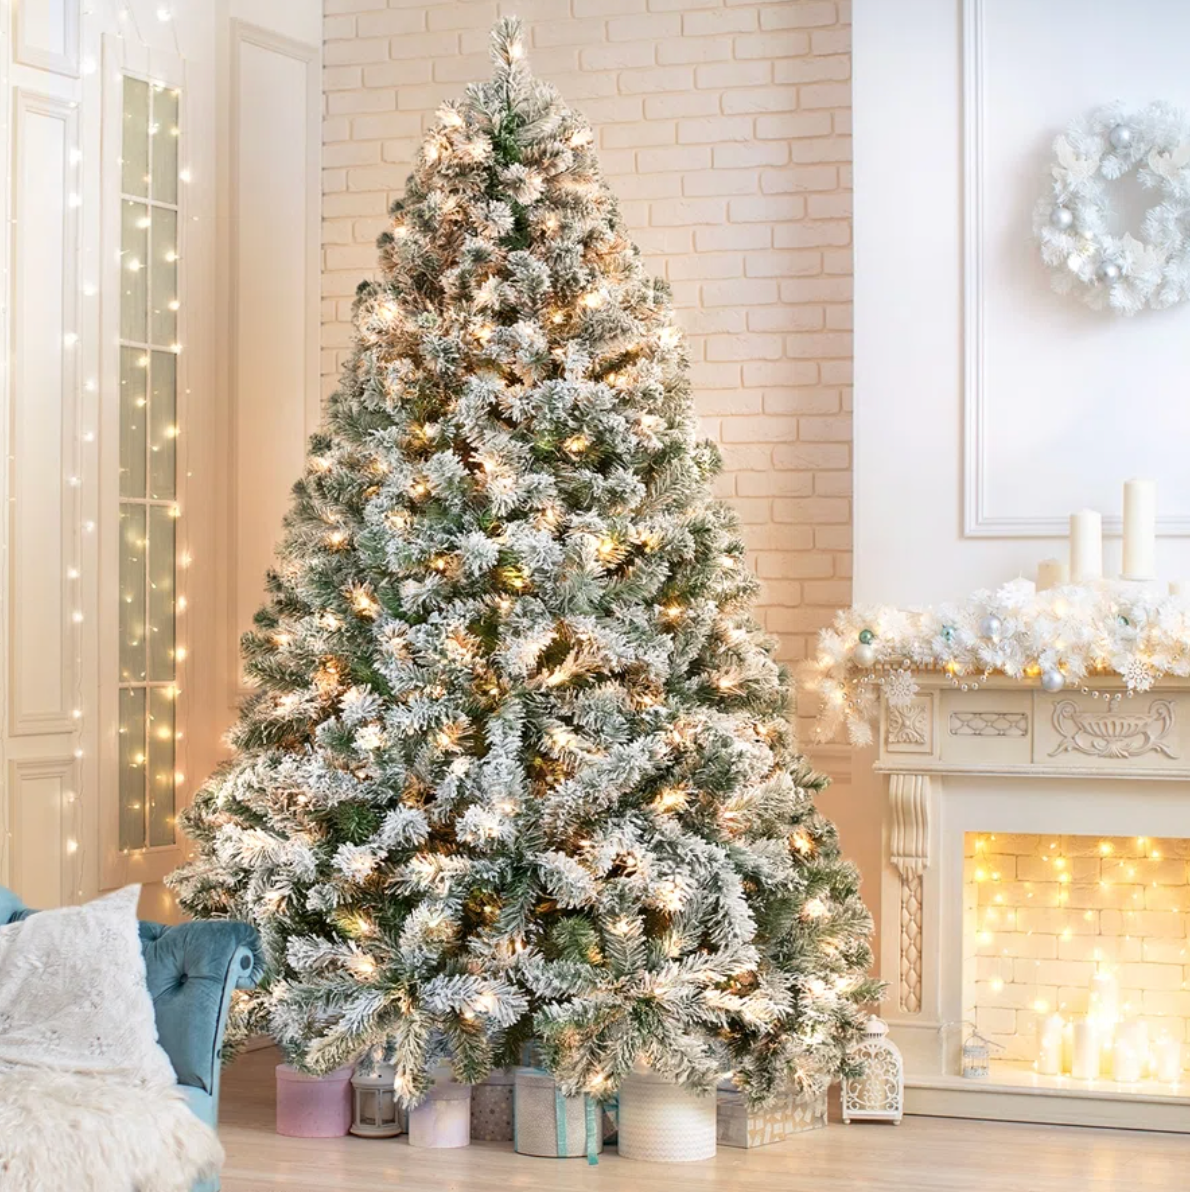 New Years' sales 2020: Save on holiday decor for next Christmas at  retailers like Wayfair, Home Depot, and more